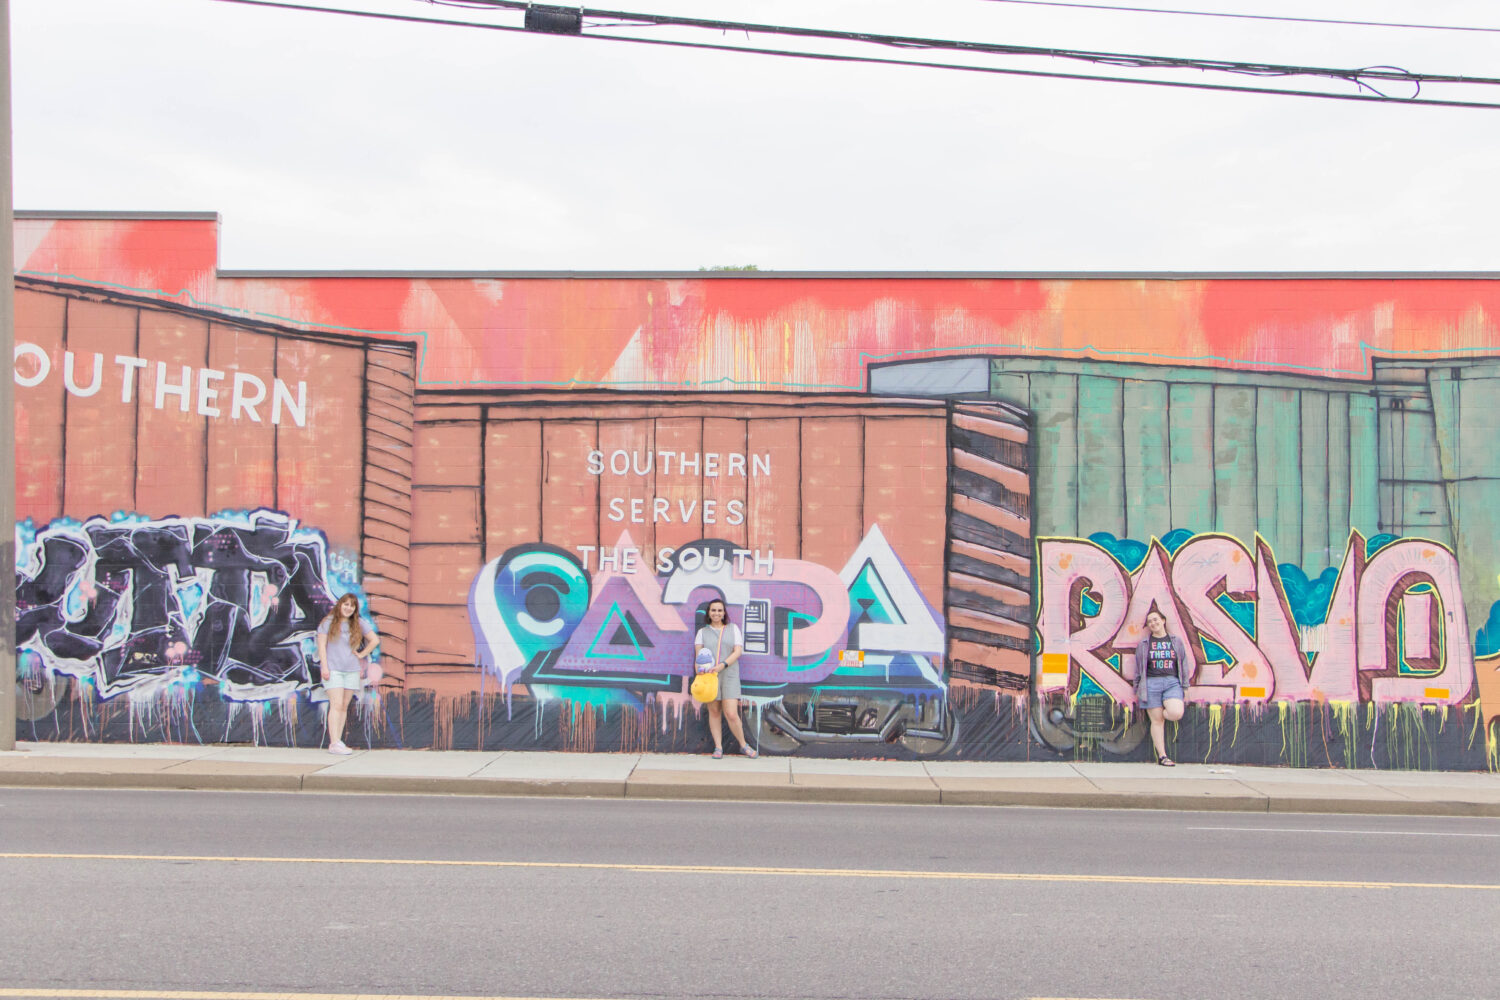 Nashville Tennessee street art you don't want to miss - Off the Wall Charlotte Avenue train mural by the UH crew